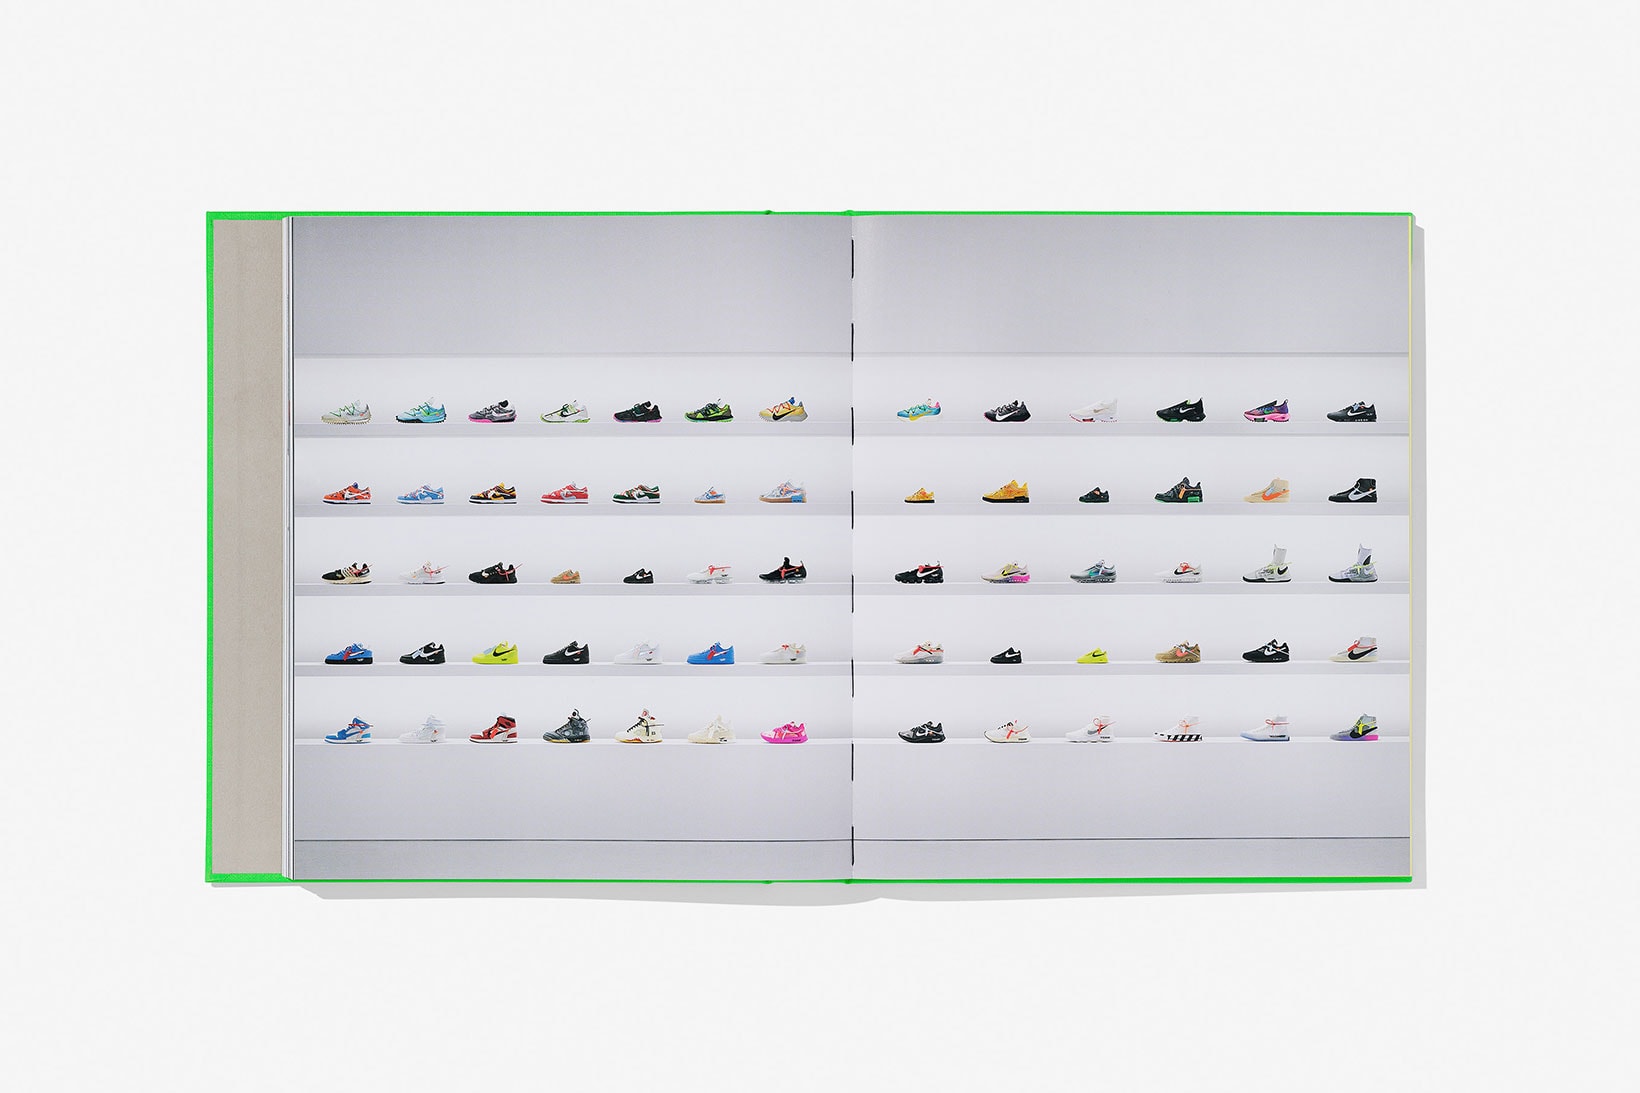 virgil abloh nike icons book retrospective collaboration taschen off-white neon green sneak peek pages sneakers